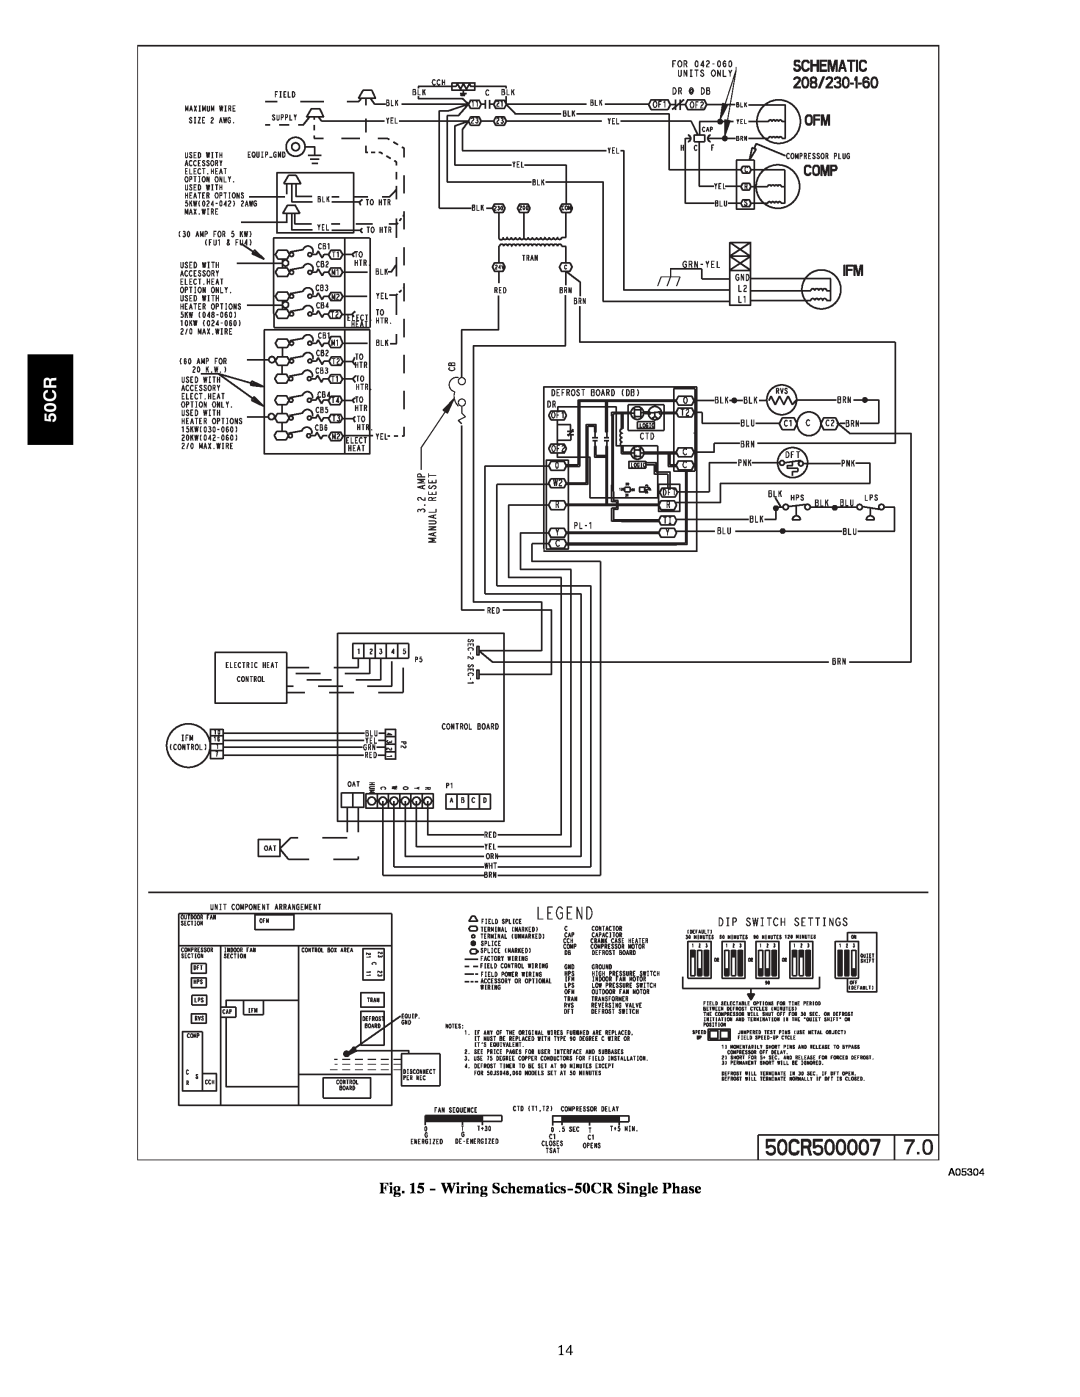 Carrier installation instructions Wiring Schematics-50CRSingle Phase, A05304 